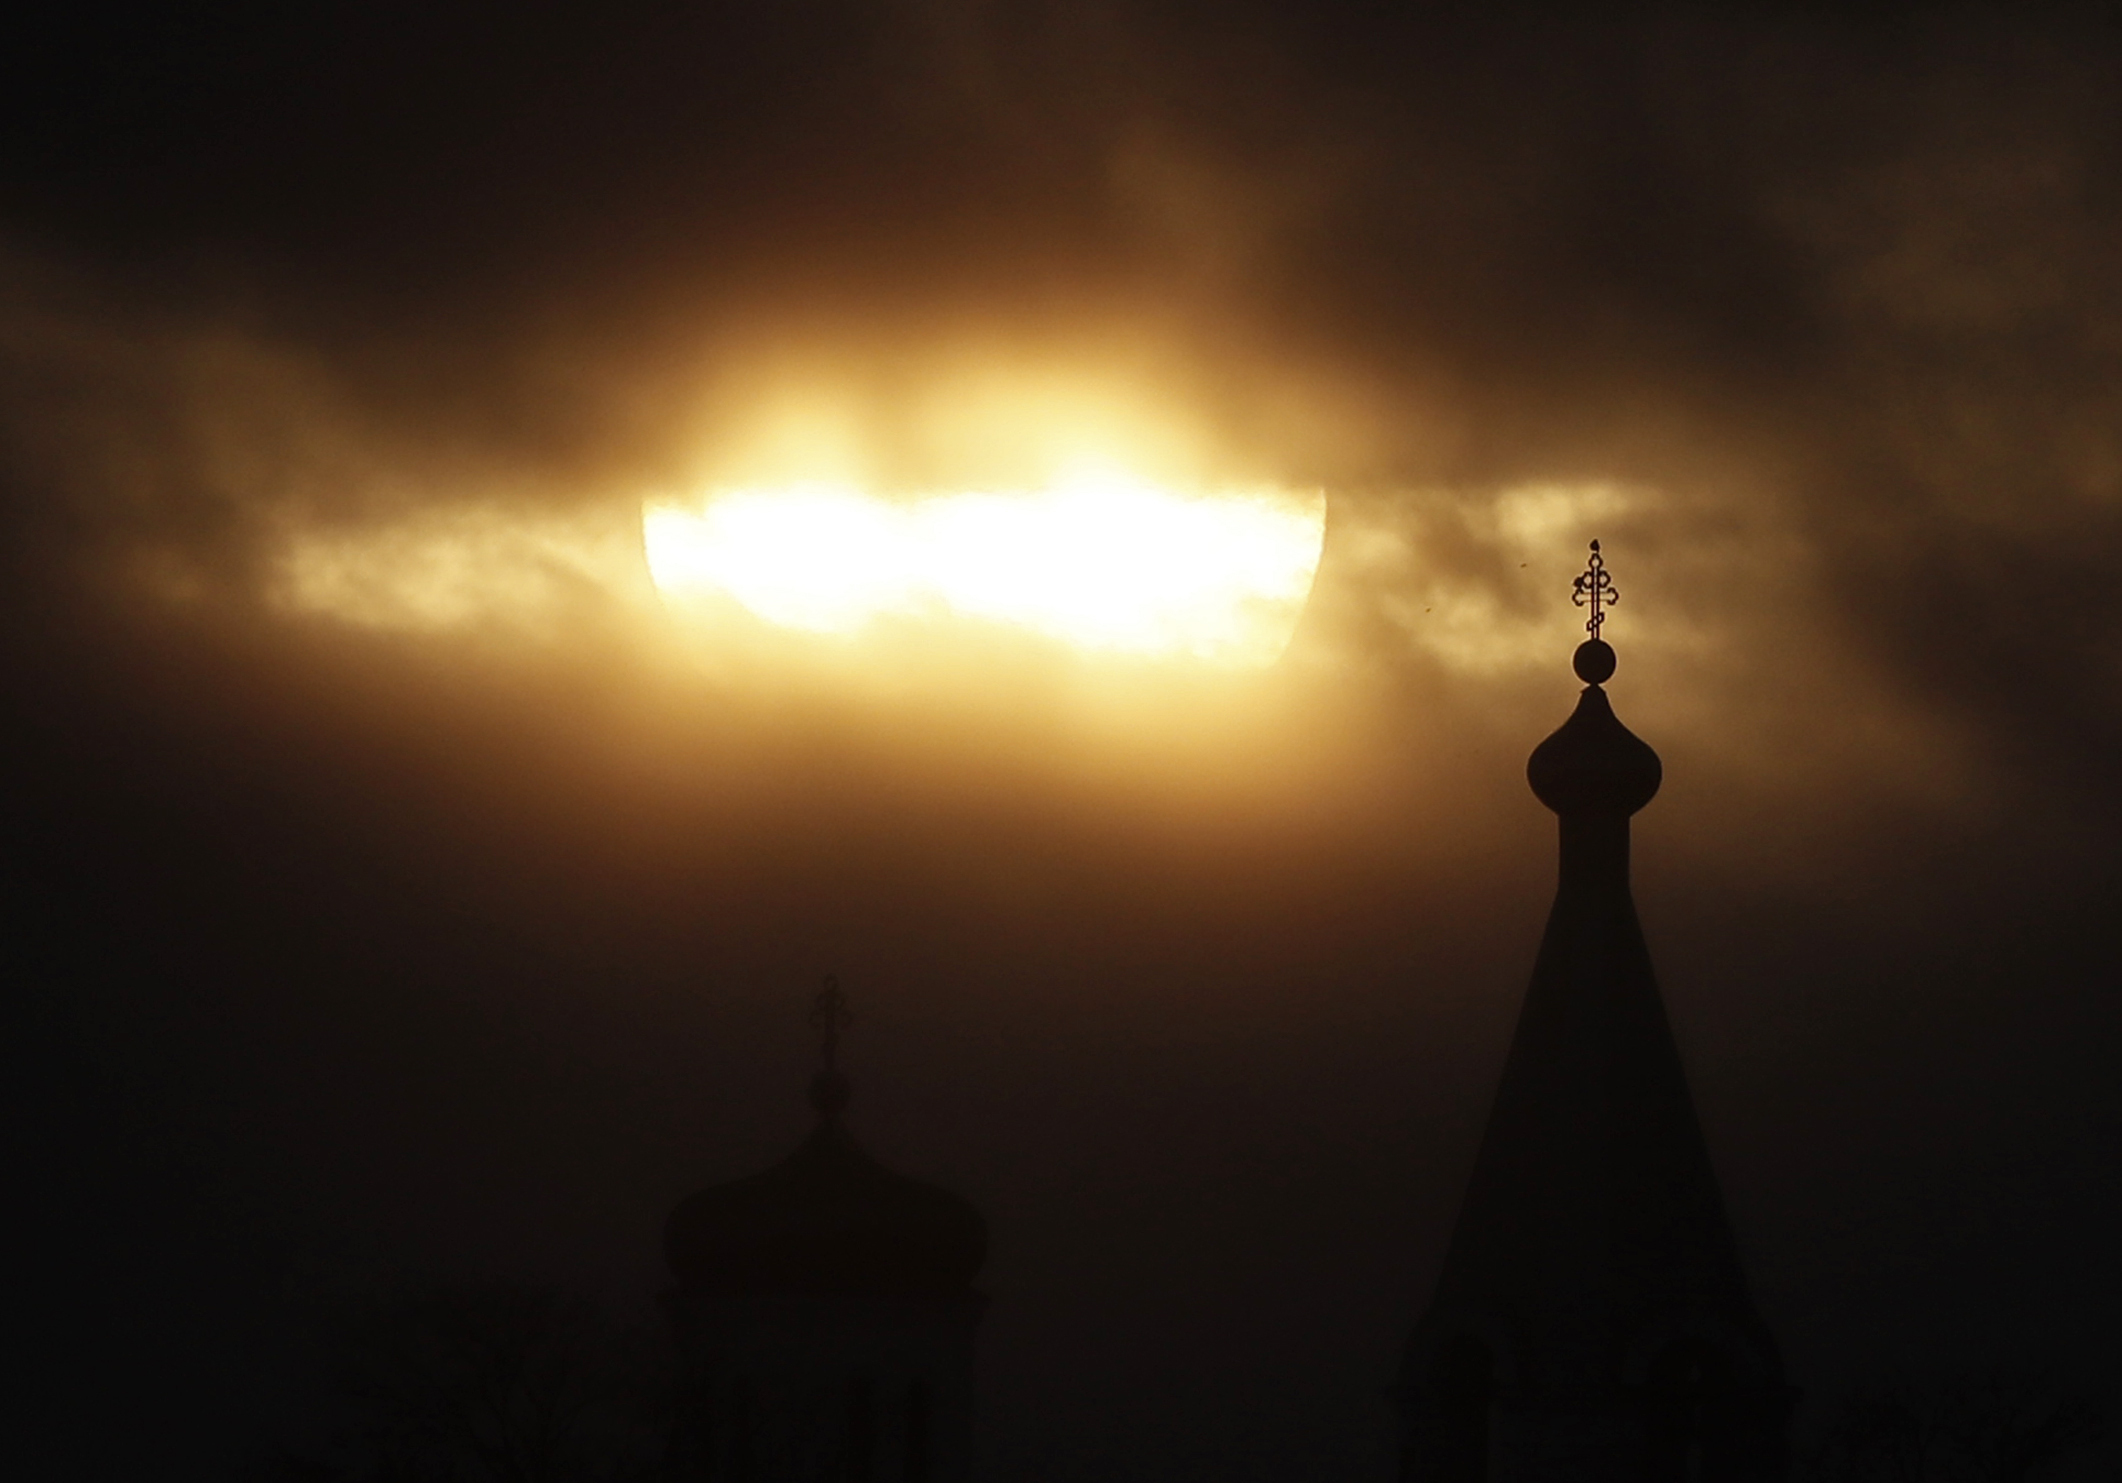 The sun sets in the clouds over an Orthodox church near the city of Volkhov, 130 km (80 miles) east of St.Petersburg, Russia, Saturday, Jan. 4, 2020. (AP Photo/Dmitri Lovetsky)